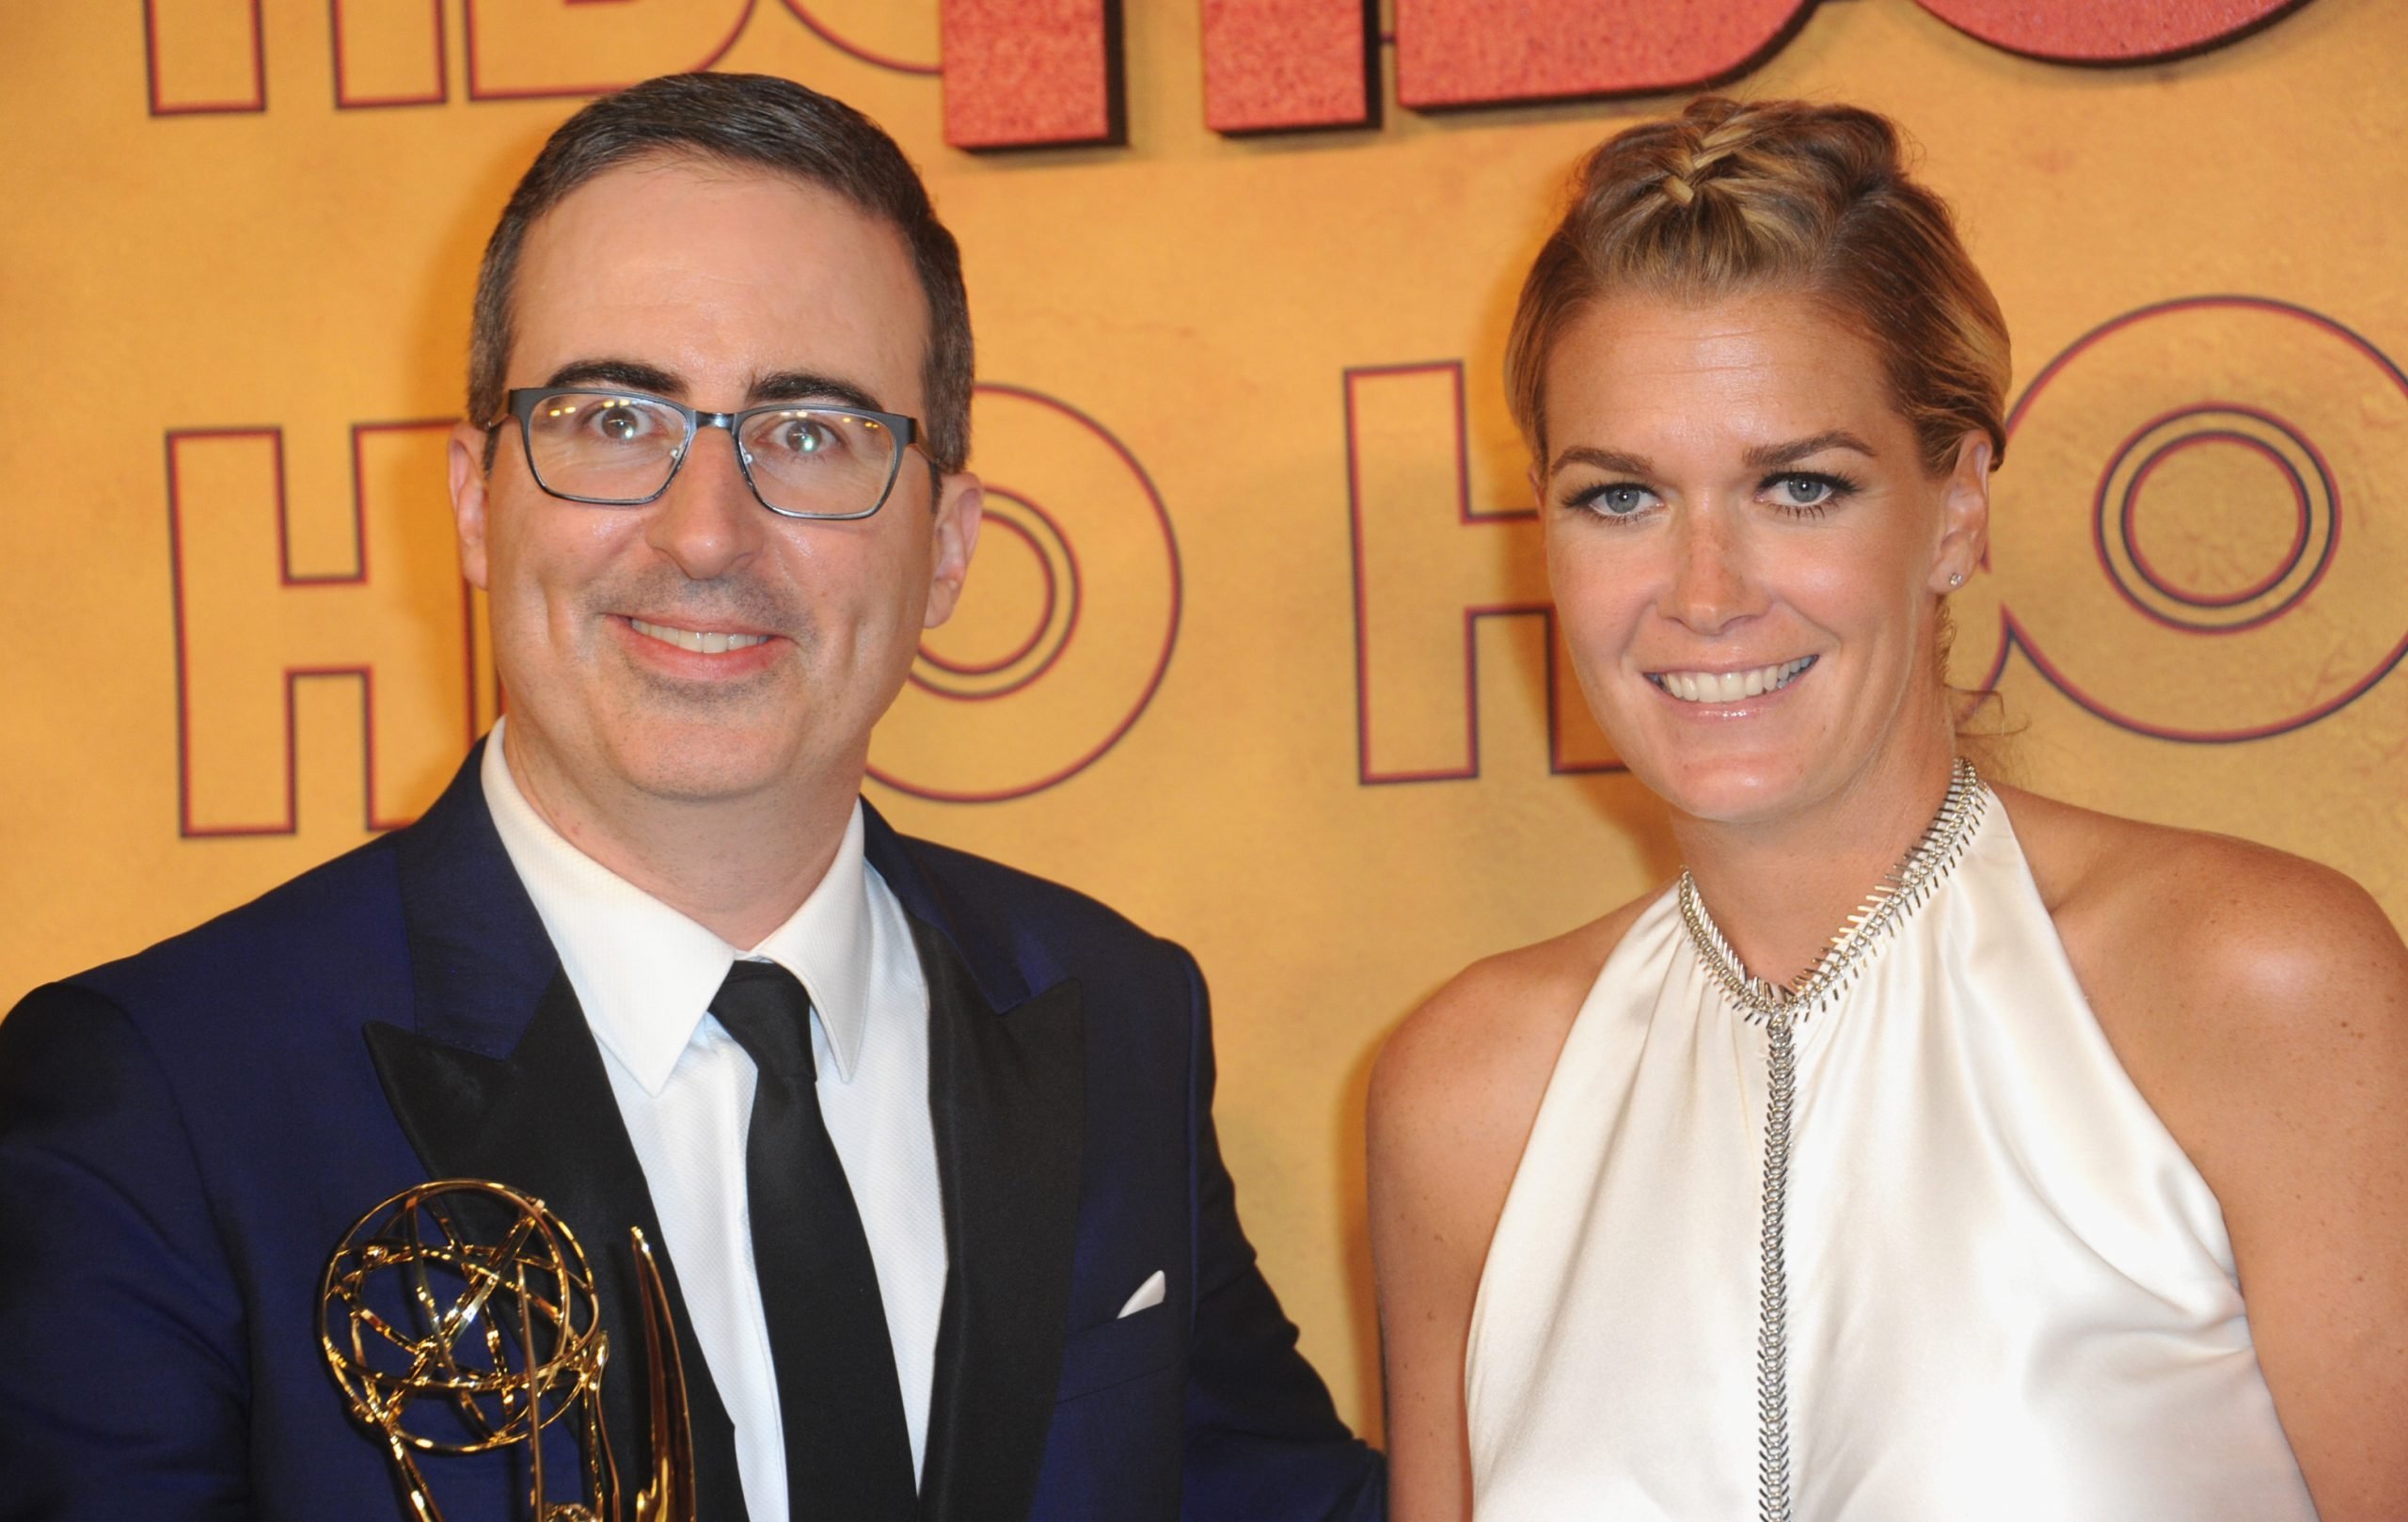 Who Is John Oliver's Wife? Everything to Know About Kate Norley